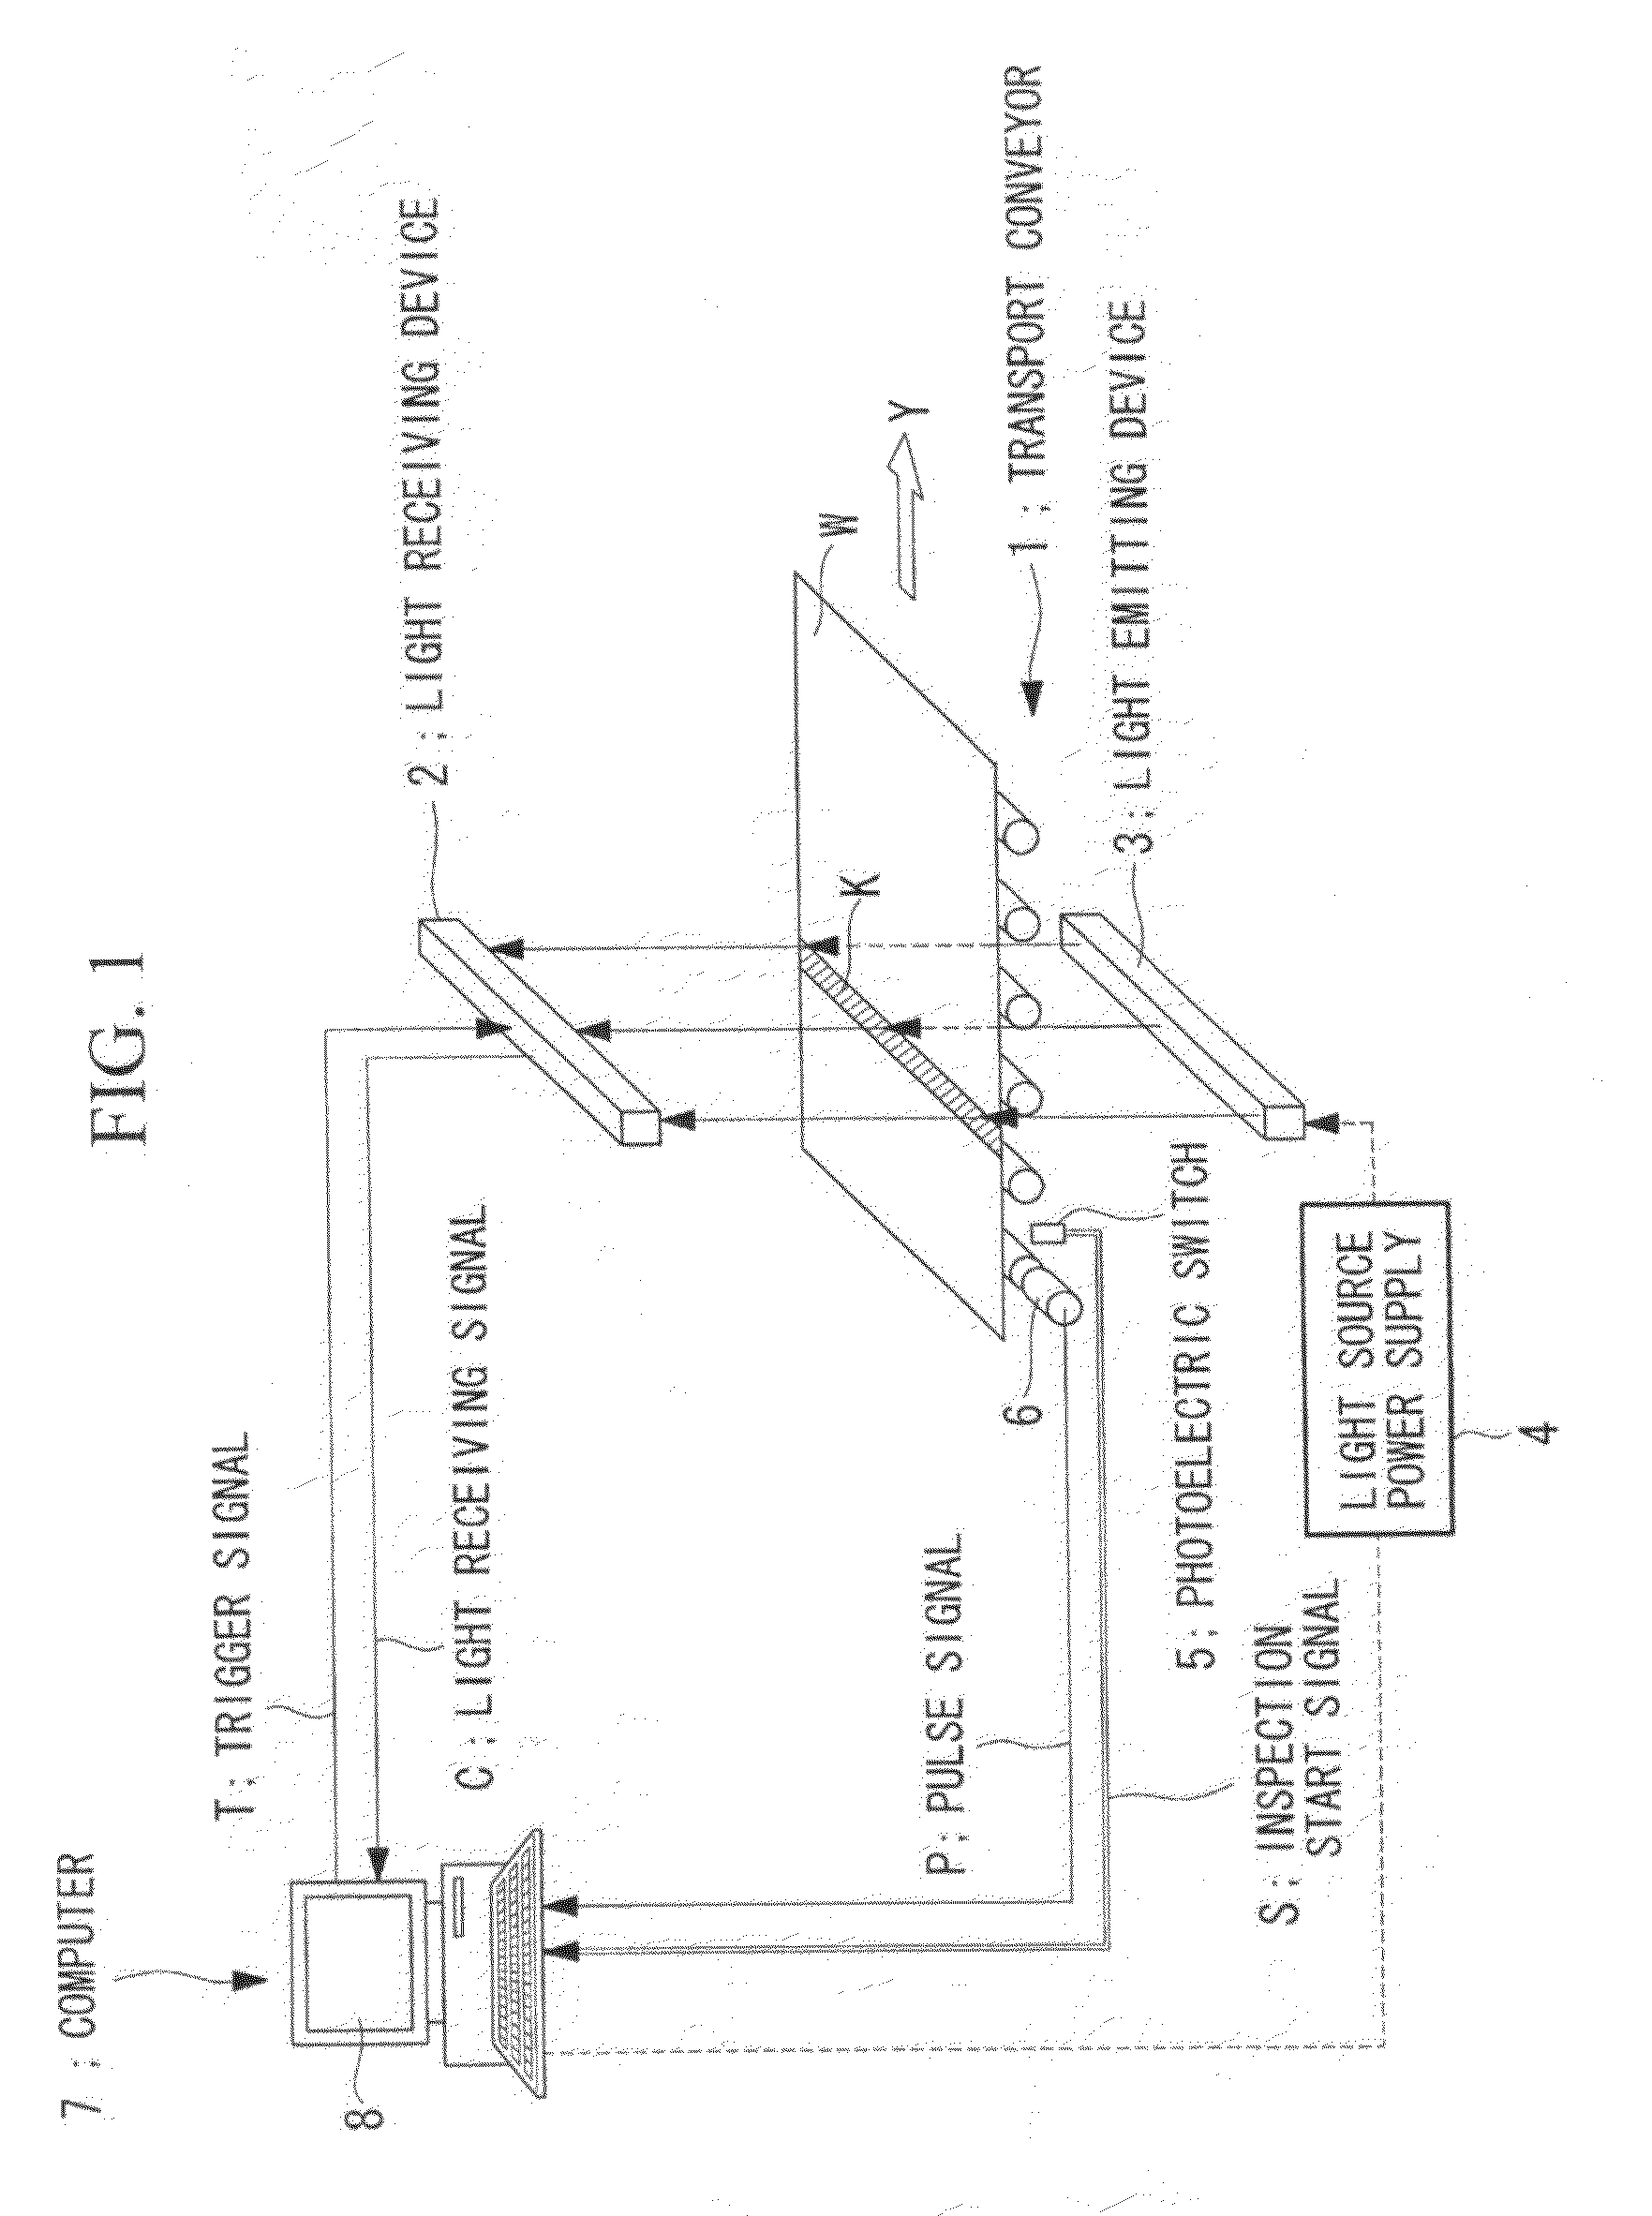 Wavelength selection method, film thickness measurement method, film thickness measurement apparatus, and system for producing thin film silicon device